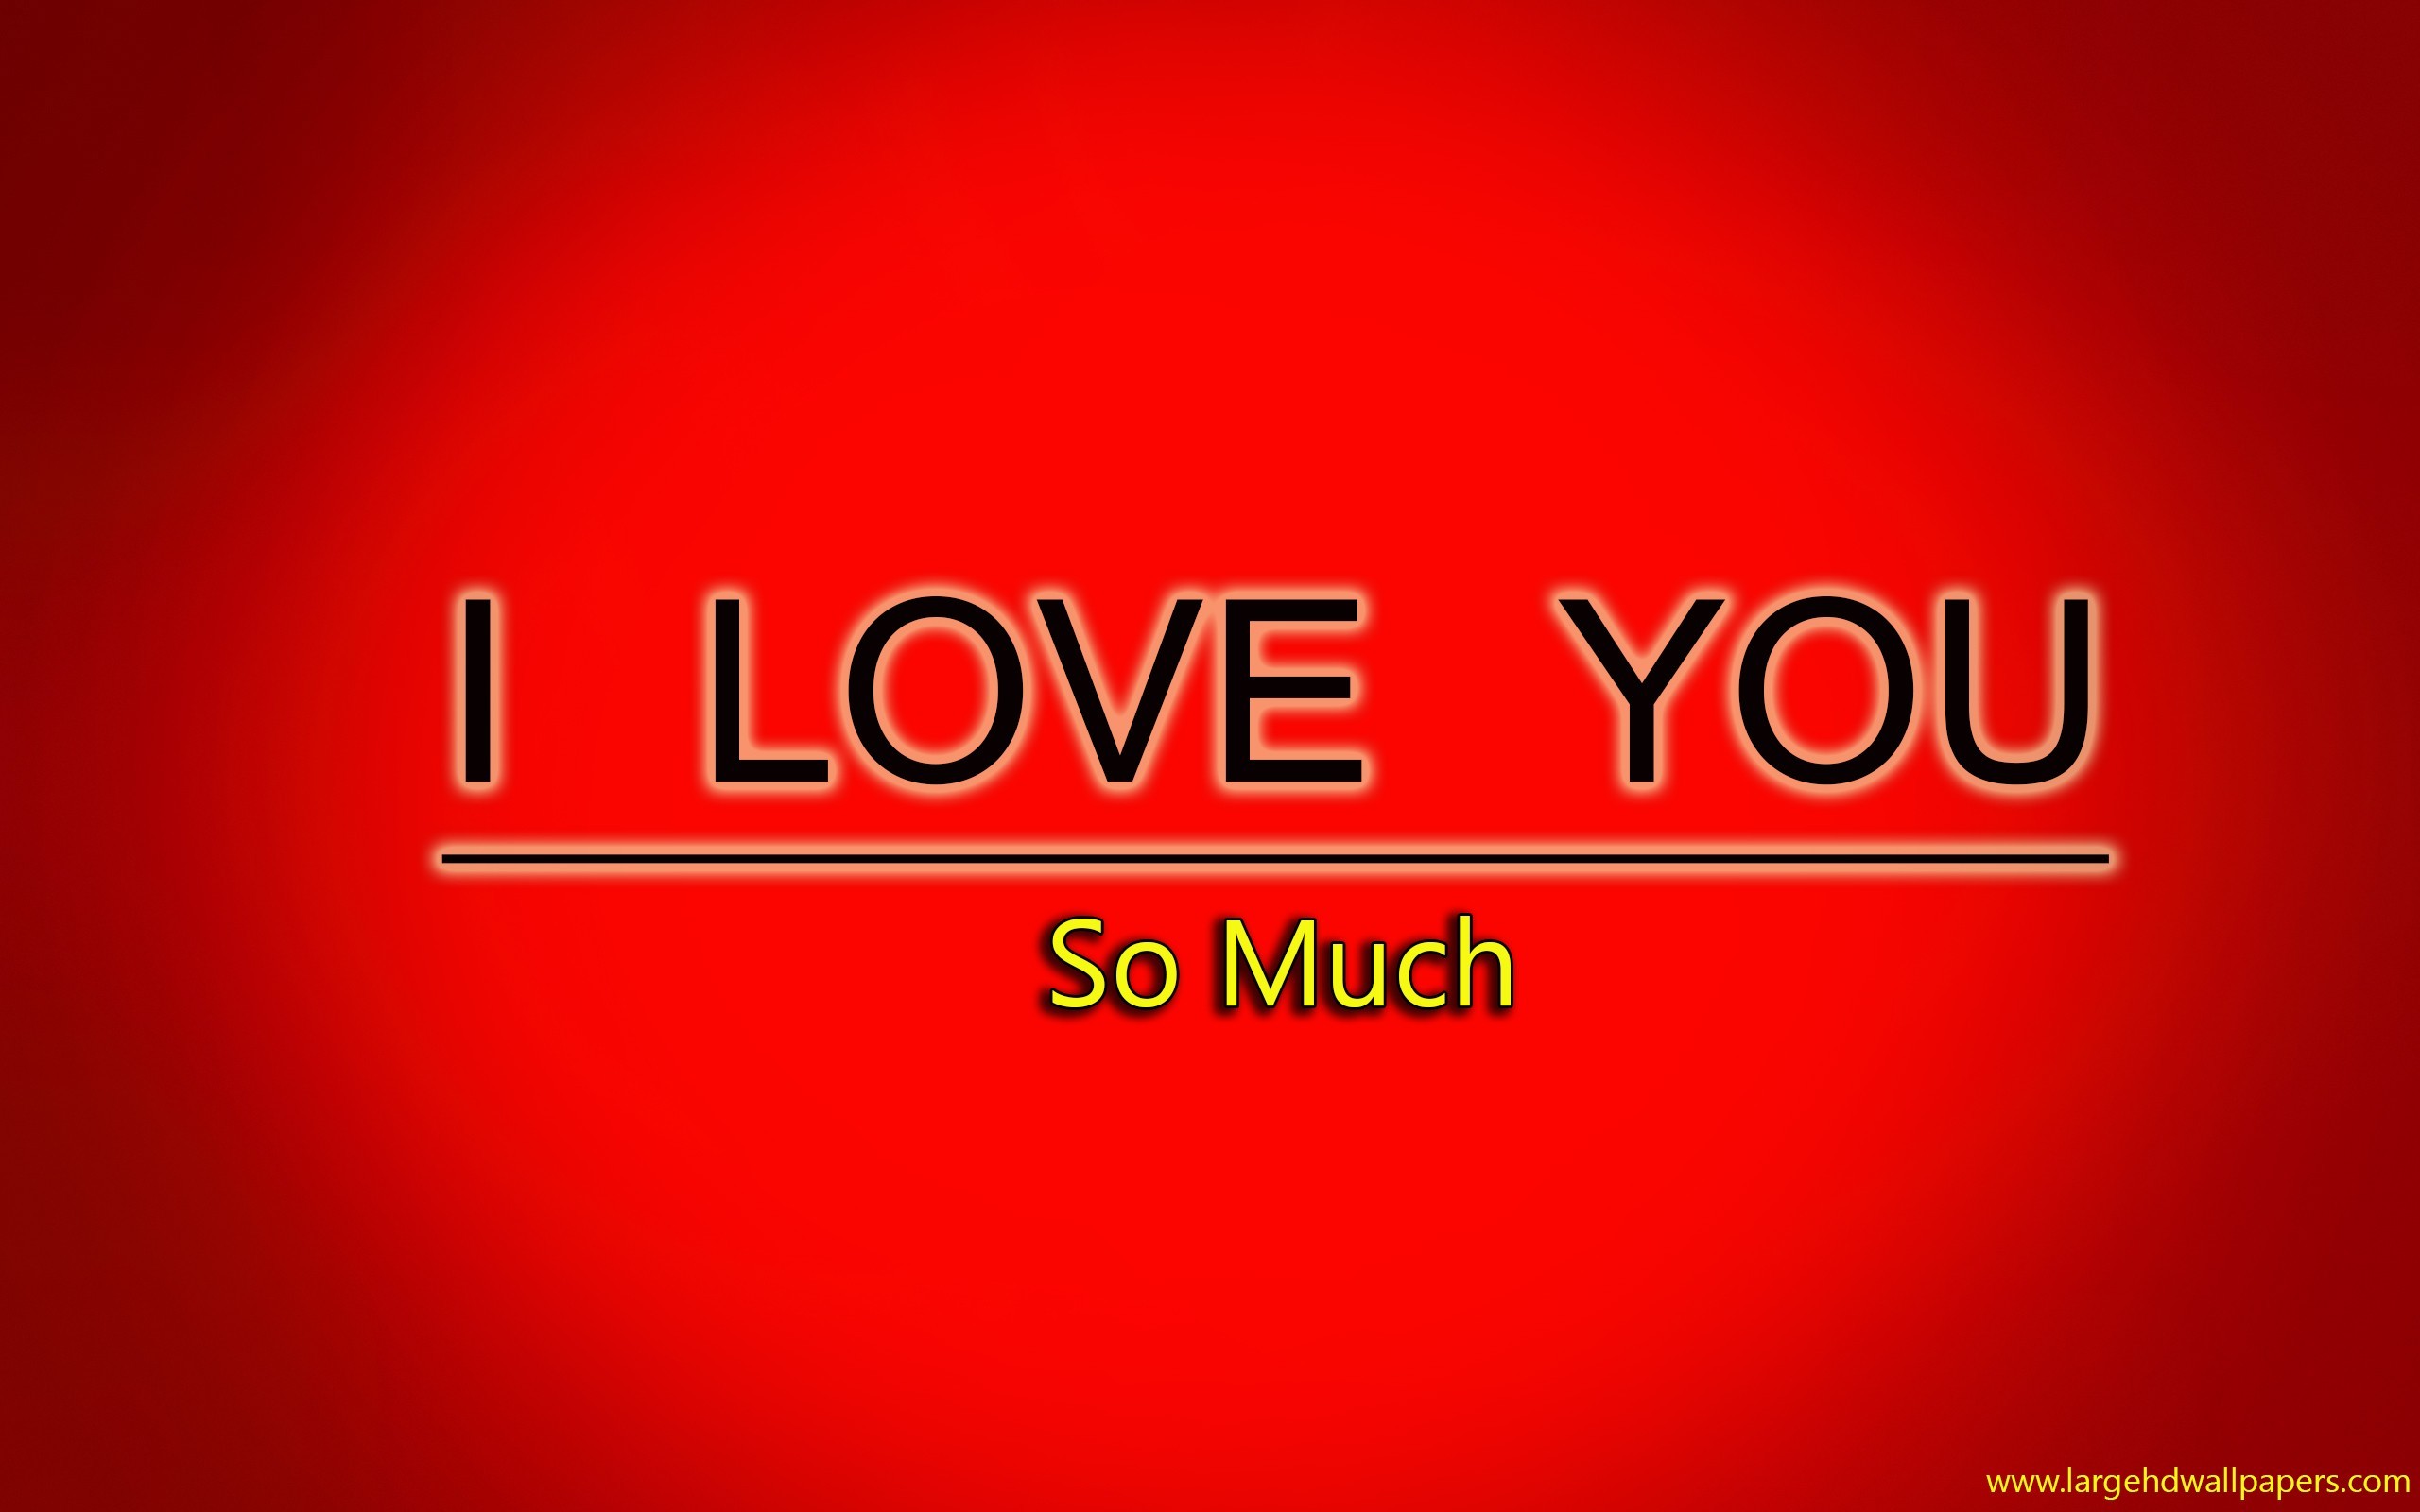 2560x1600 i love you images and hd photos [#5]